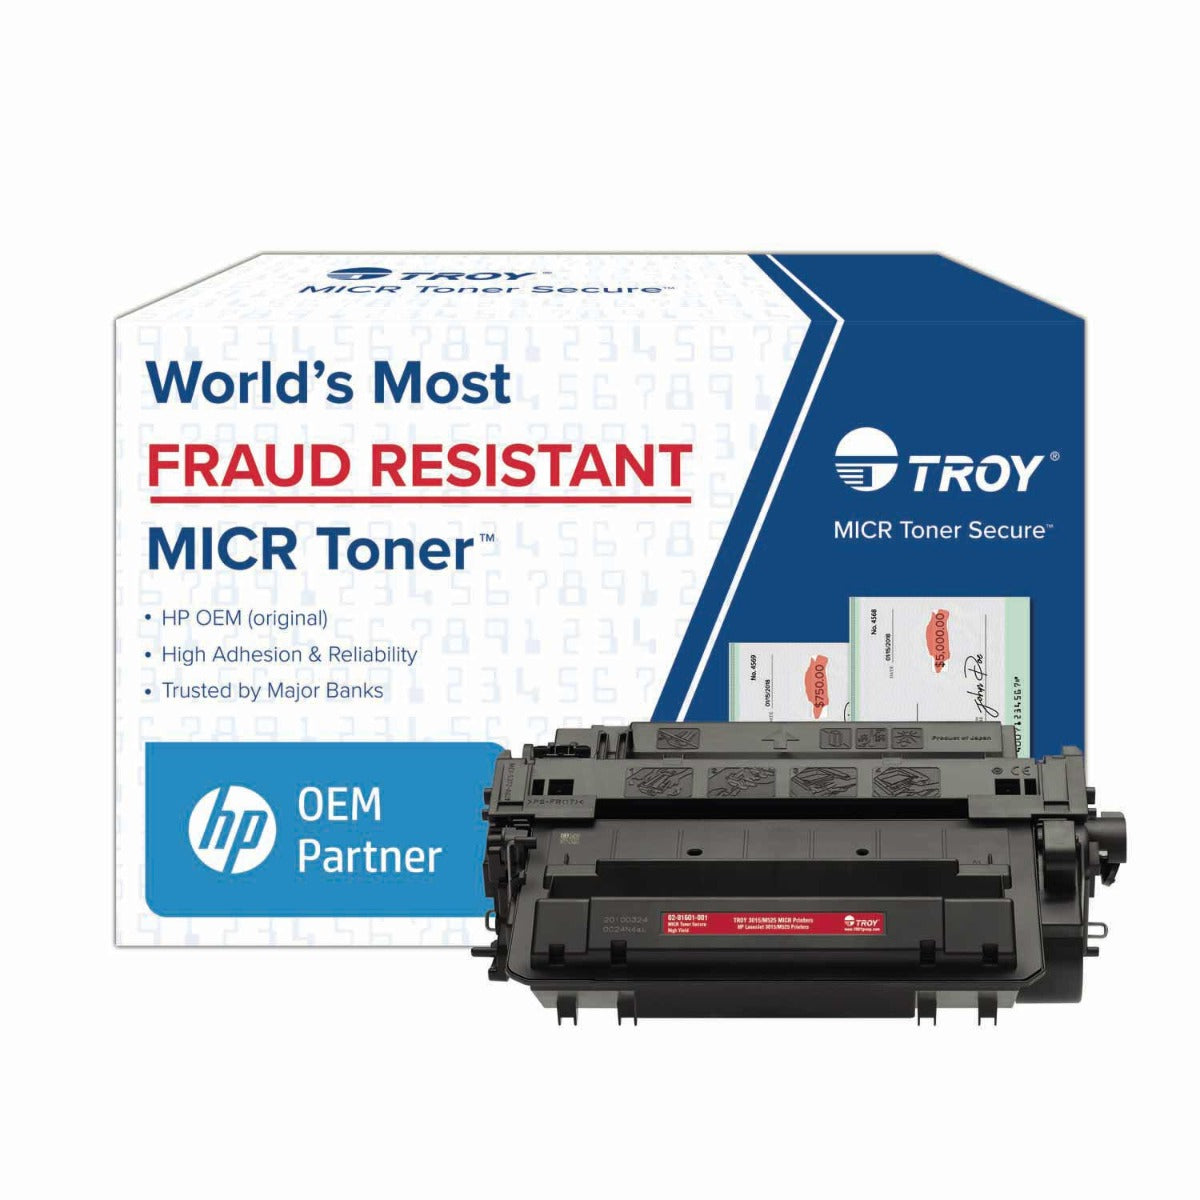 TROY P3015/M525 MICR Toner Secure High Yield Cartridge (Coordinating HP Part Number: CE255X)